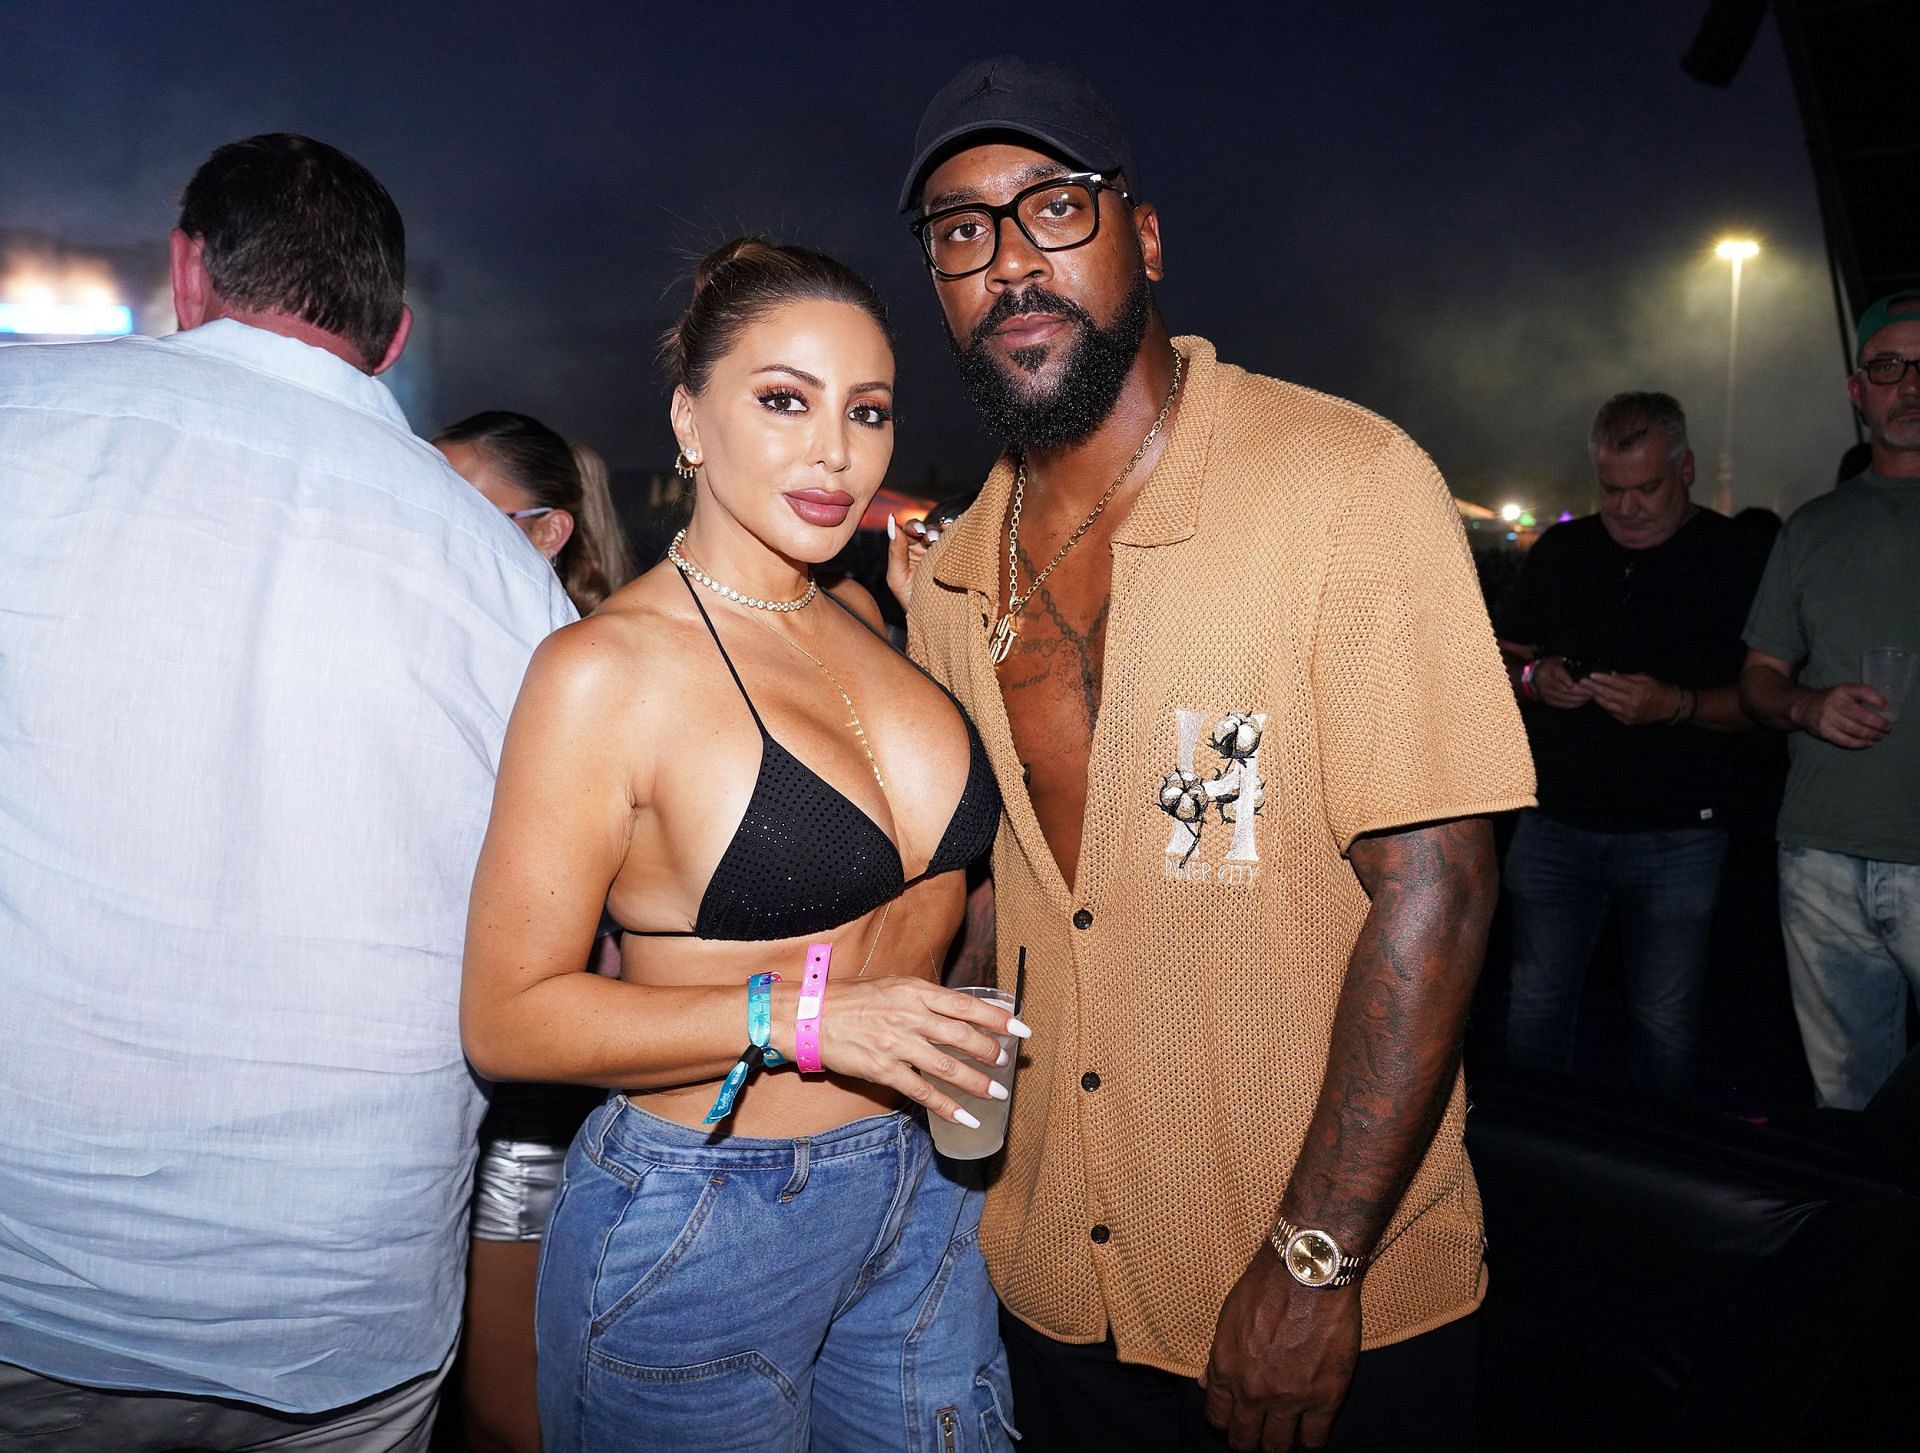 Marcus Jordan shares detail on his sex life with Larsa Pippen